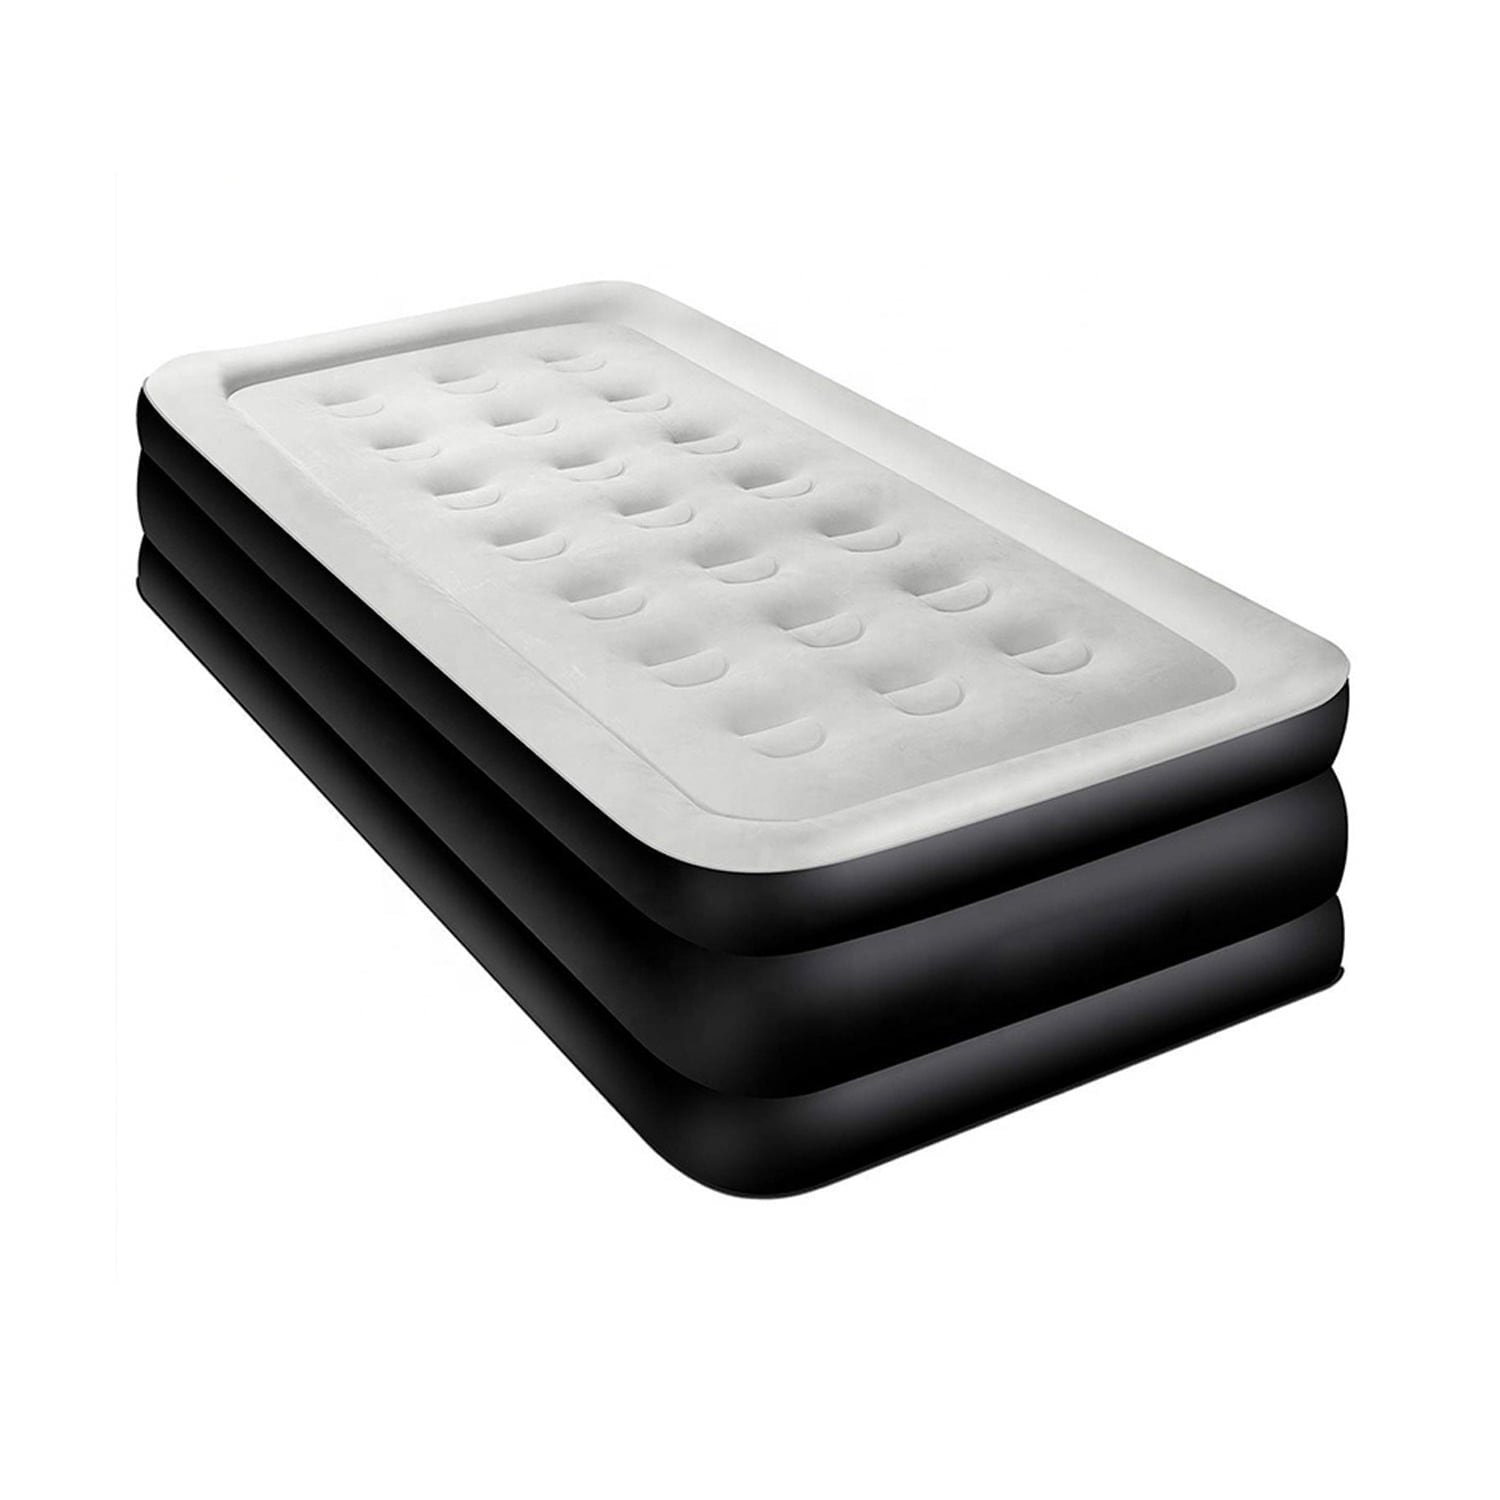 https://ak1.ostkcdn.com/images/products/is/images/direct/a131c95ee05534106e8f0ec237b91ccc3338a668/SUGIFT-Air-Mattress-18%22-Double-High-Airbed-with-Built-in-Pump%2C-Twin.jpg